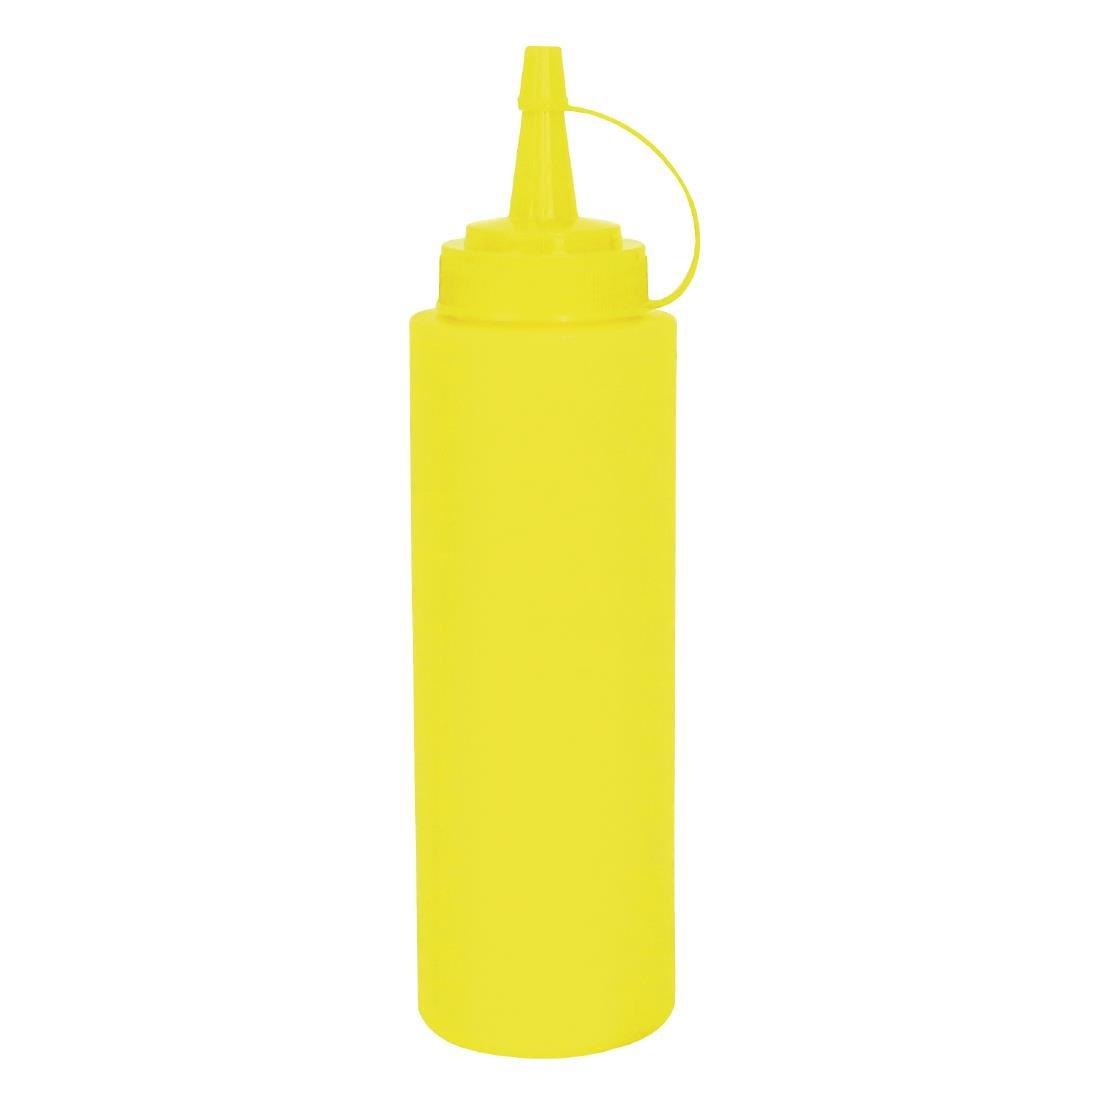 W834 - Yellow Squeeze Sauce Bottle